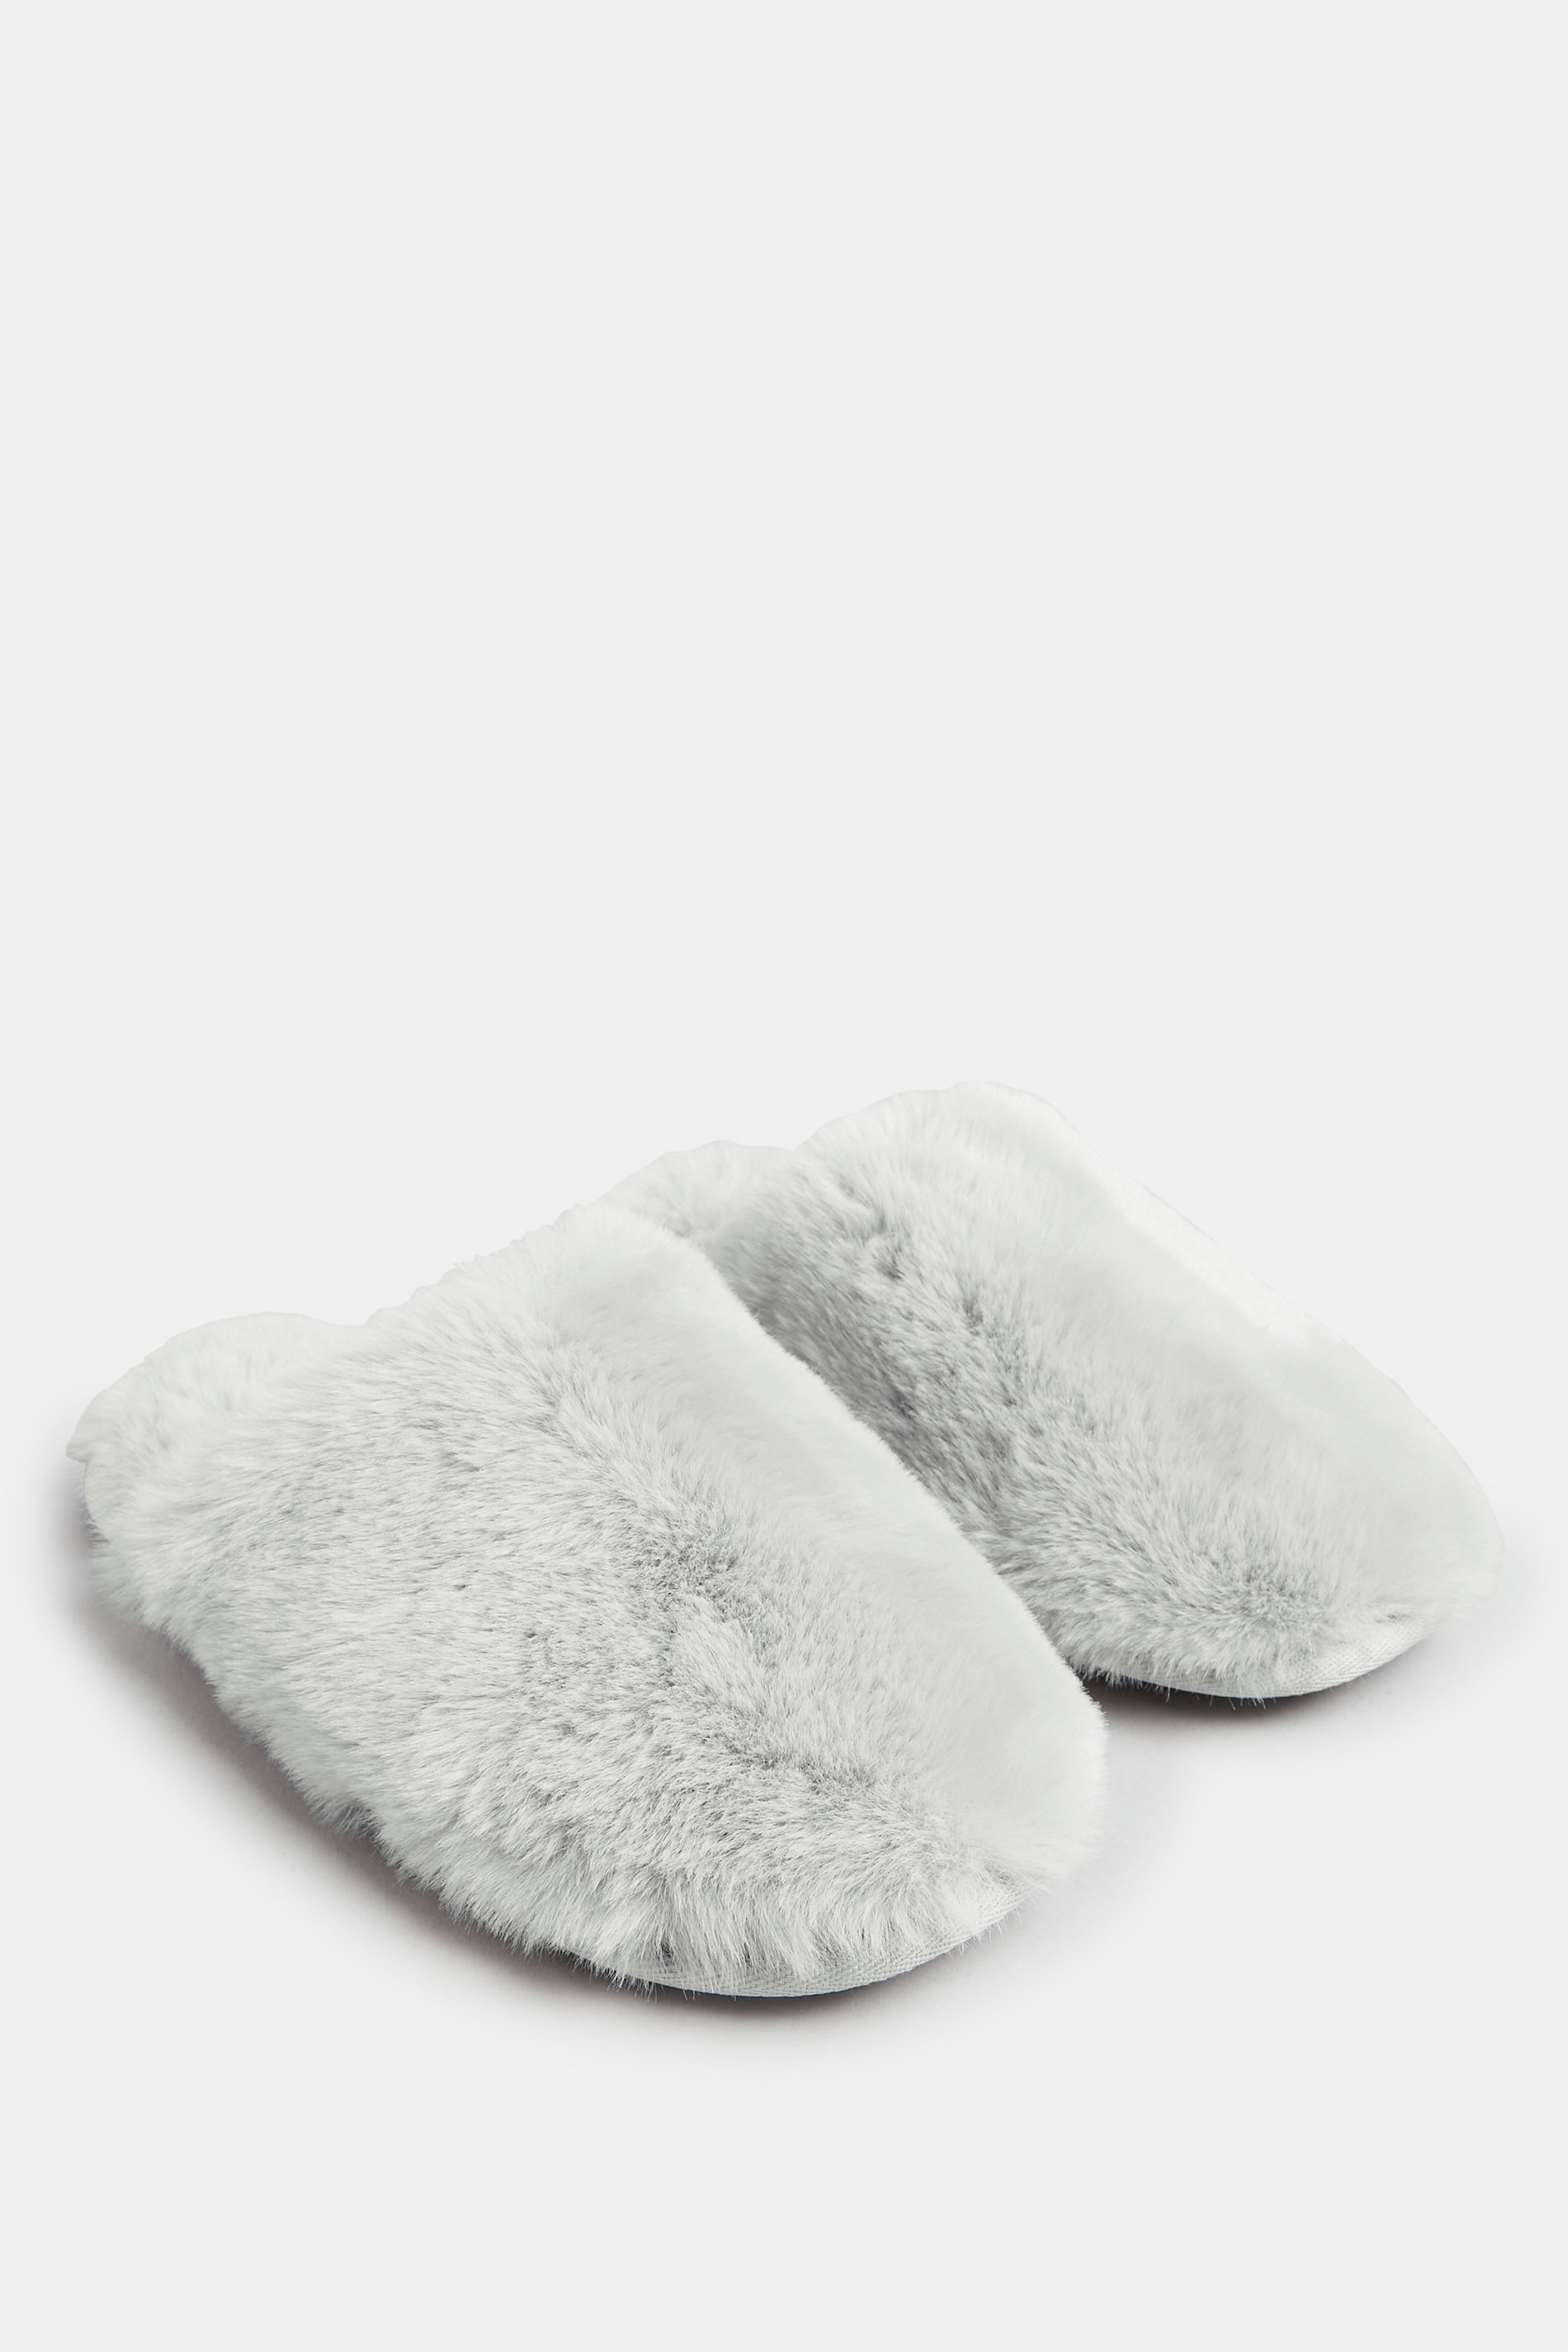 Grey Fluffy Slippers In Wide E Fit | Yours Clothing 2